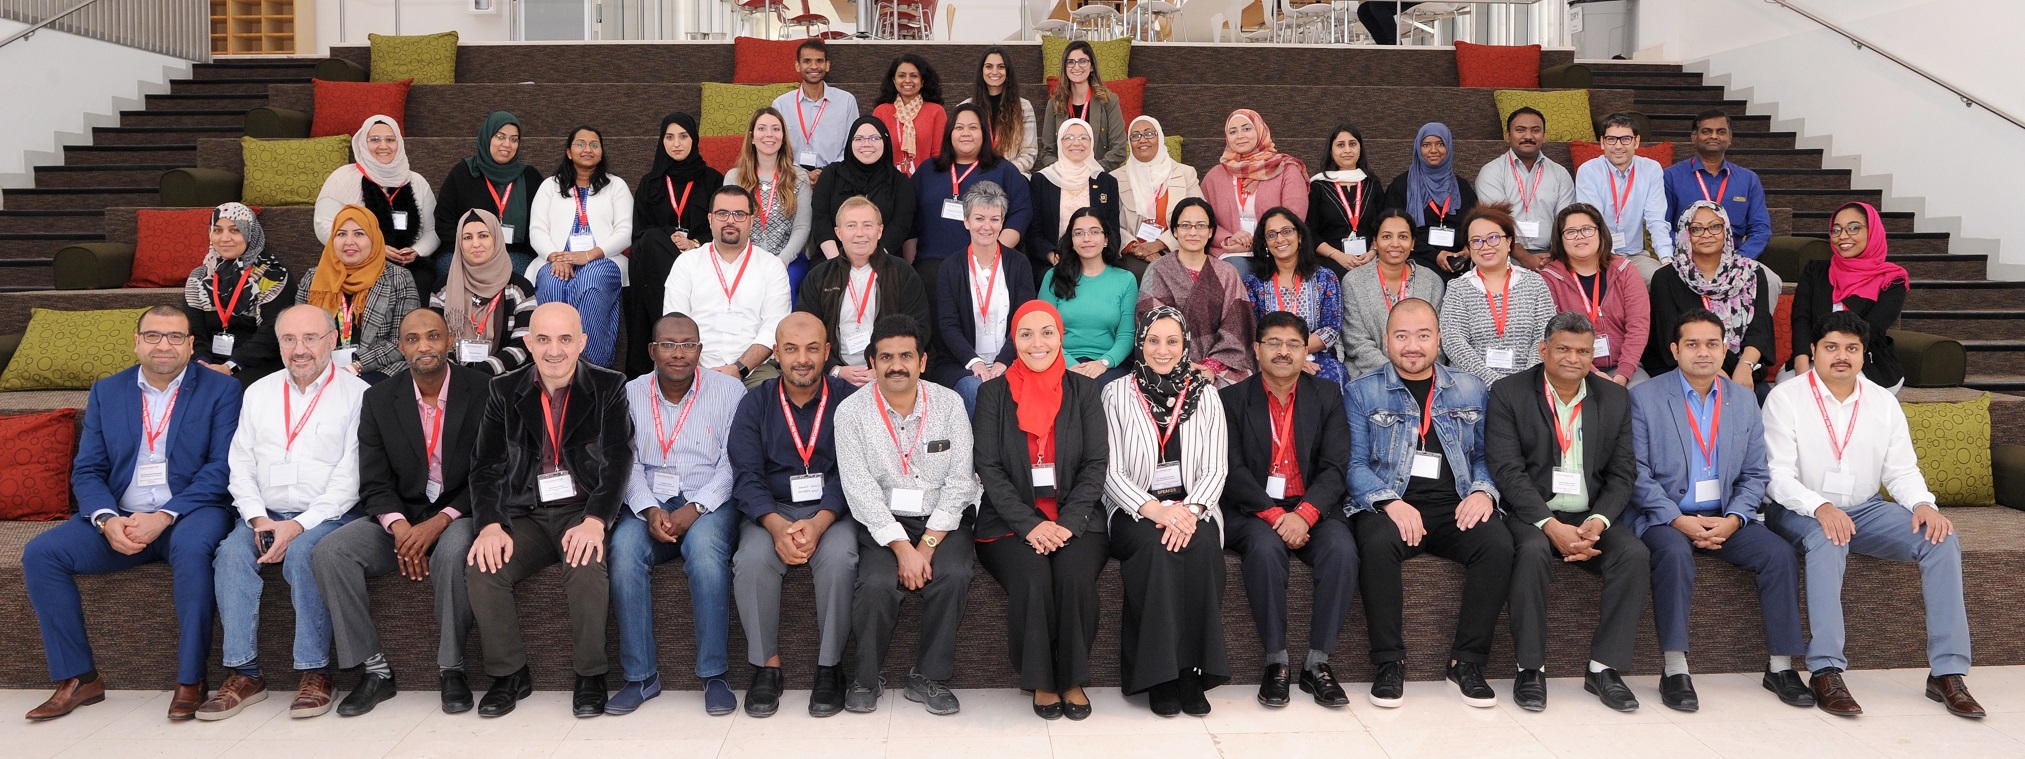 The WCM-Q systematic review workshop drew participants from the fields of healthcare, research and education.